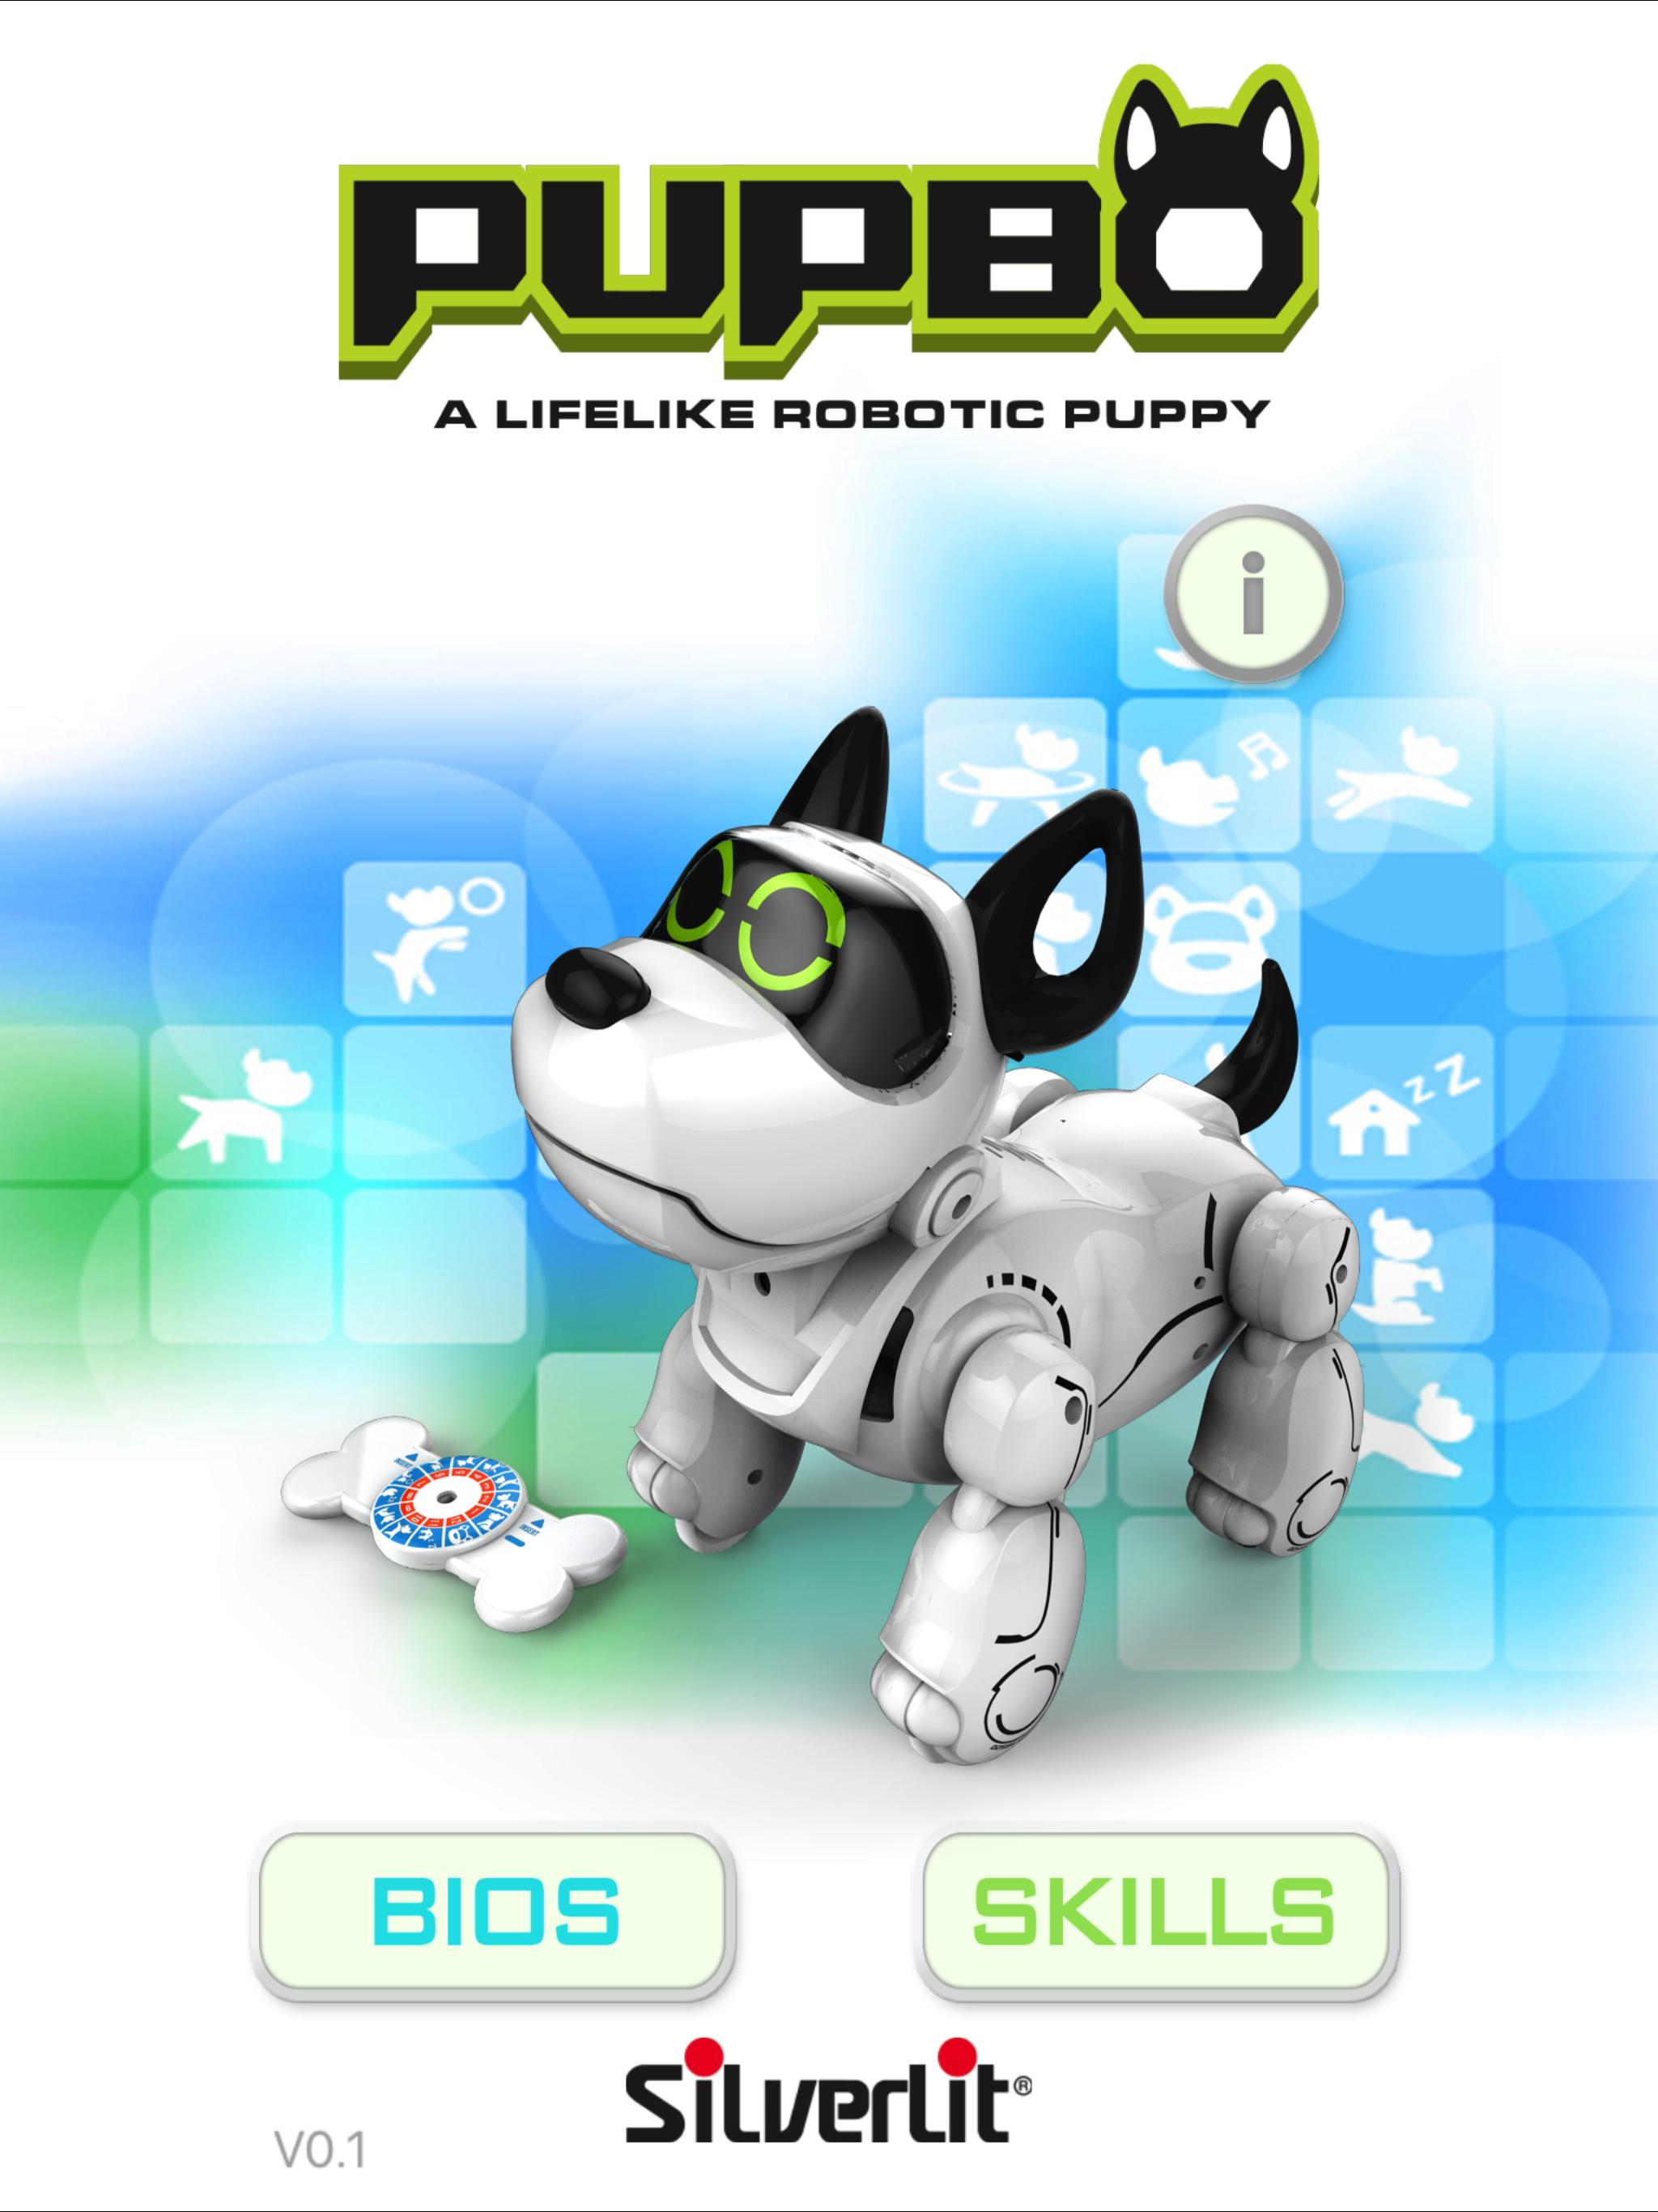 PUPBO - A Lifelike Robotic Puppy for Android - APK Download